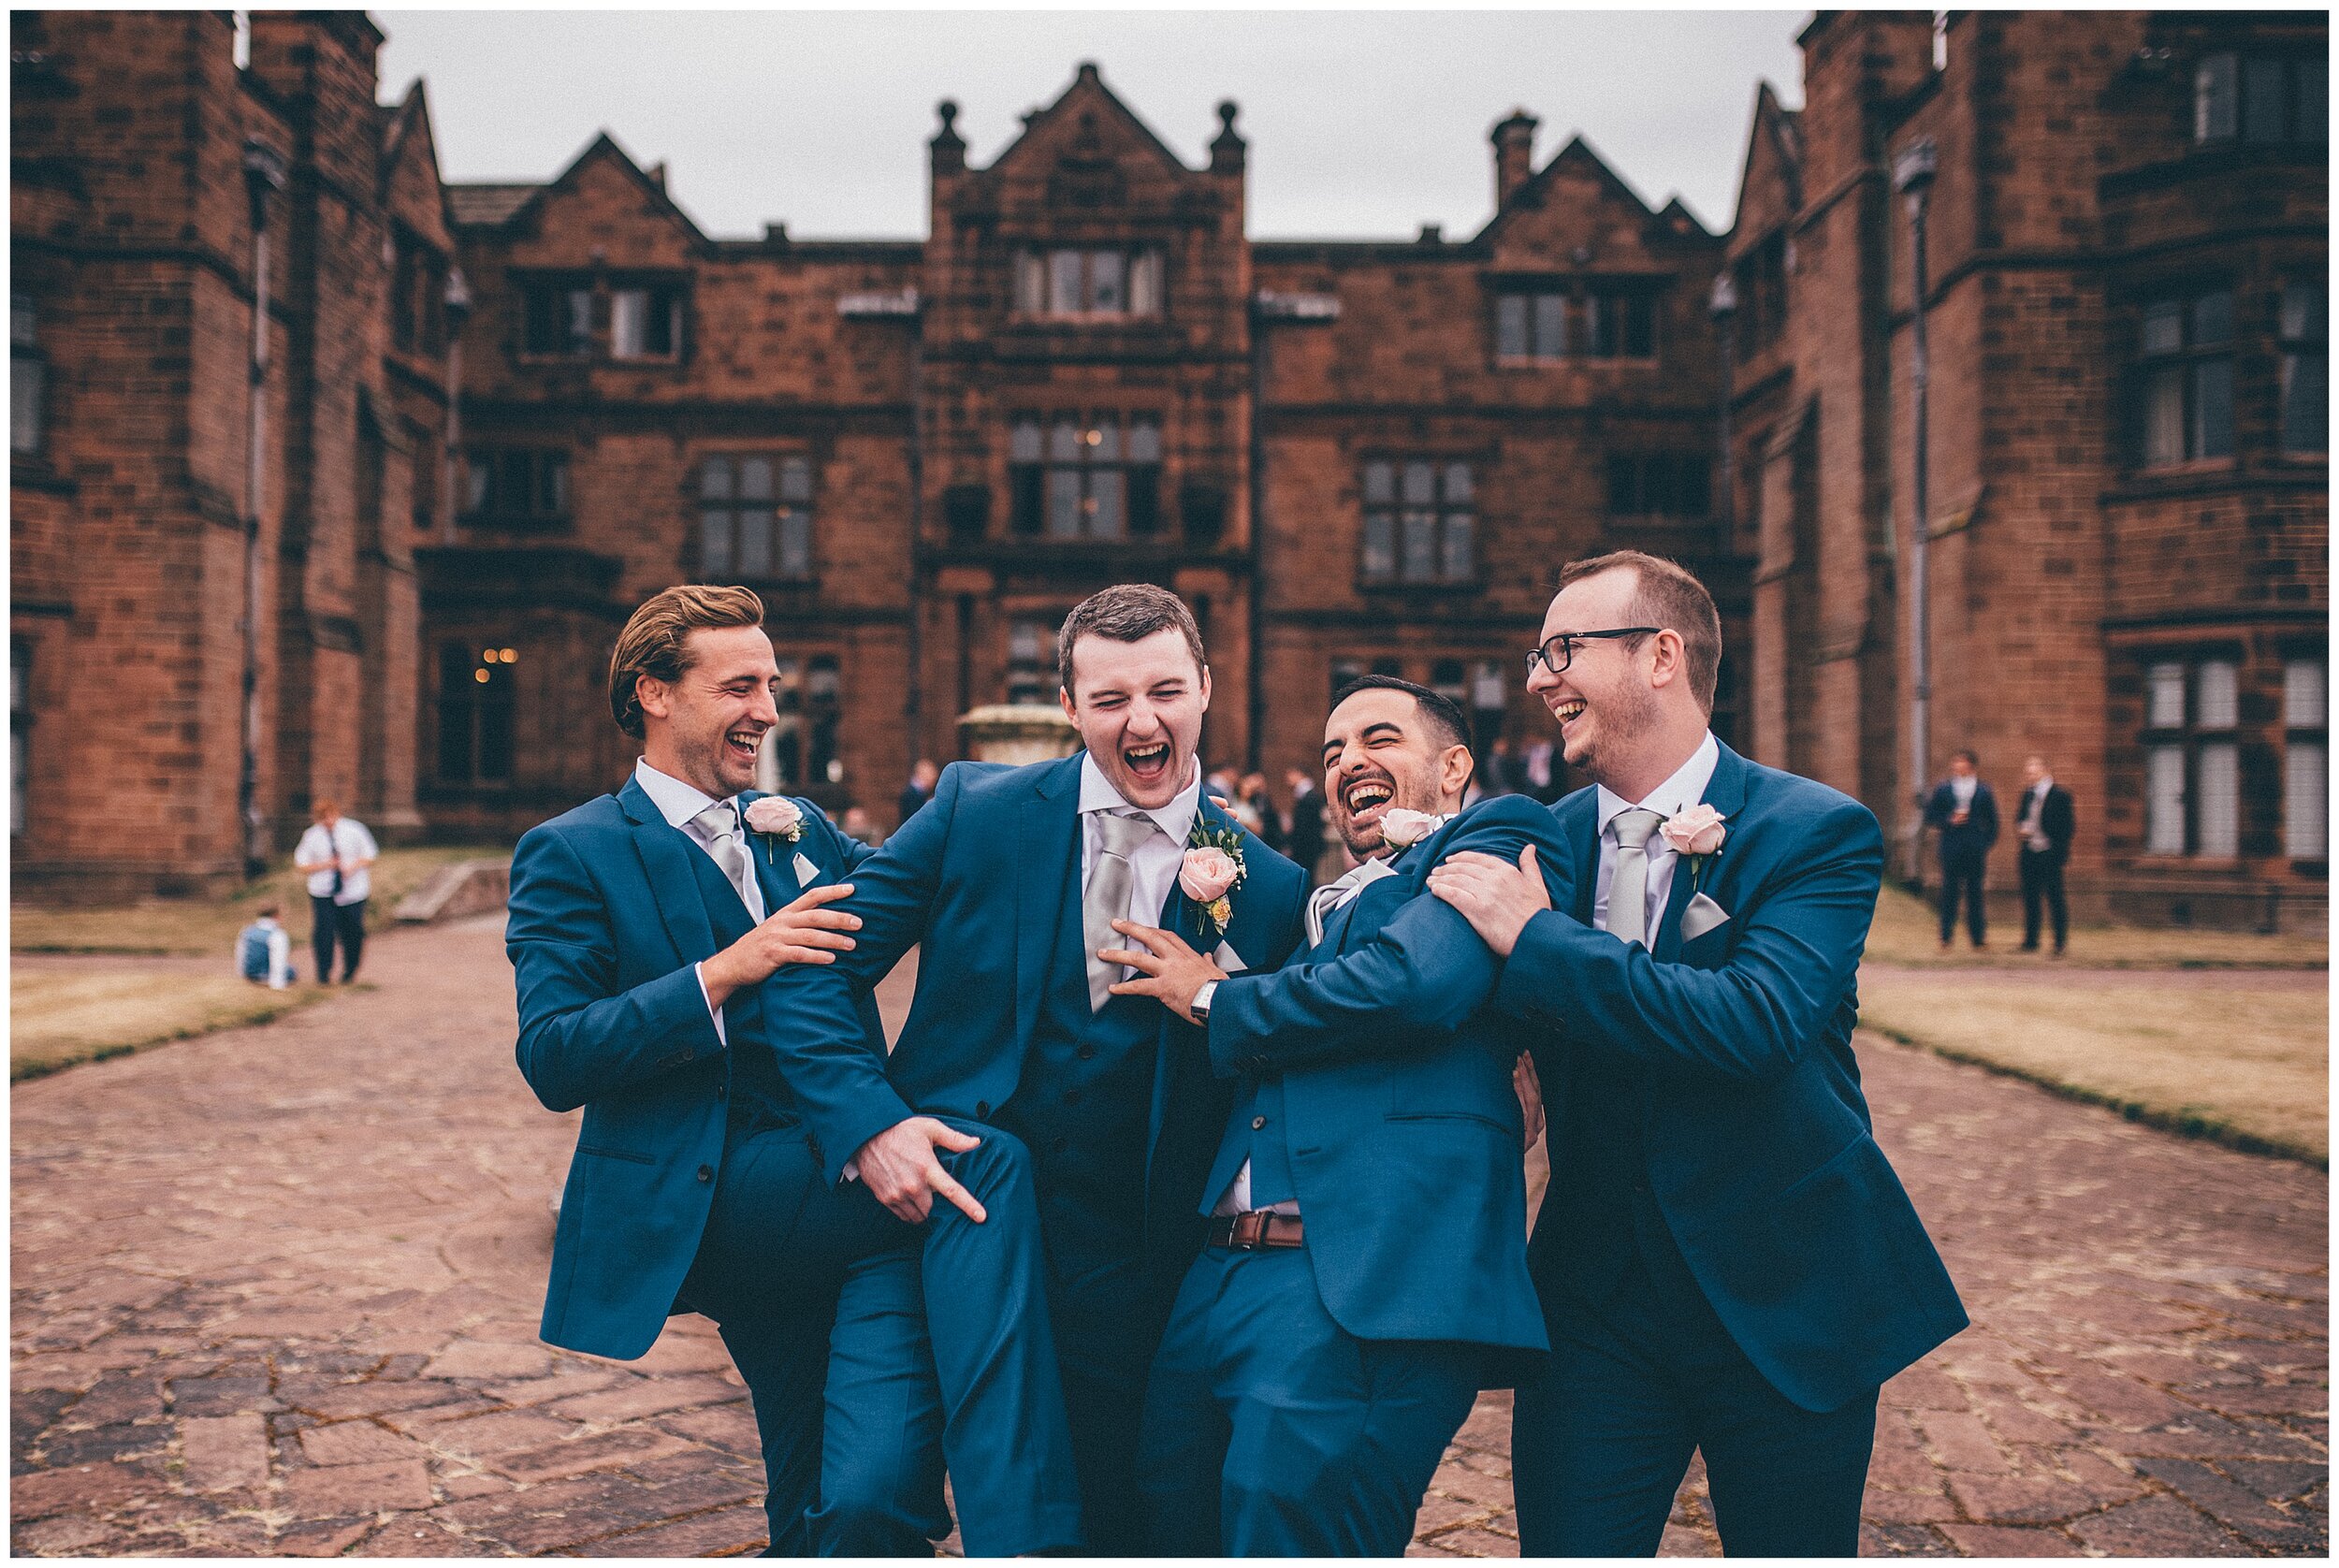 Bride and groom photos with their bridal party at Thornton Manor.